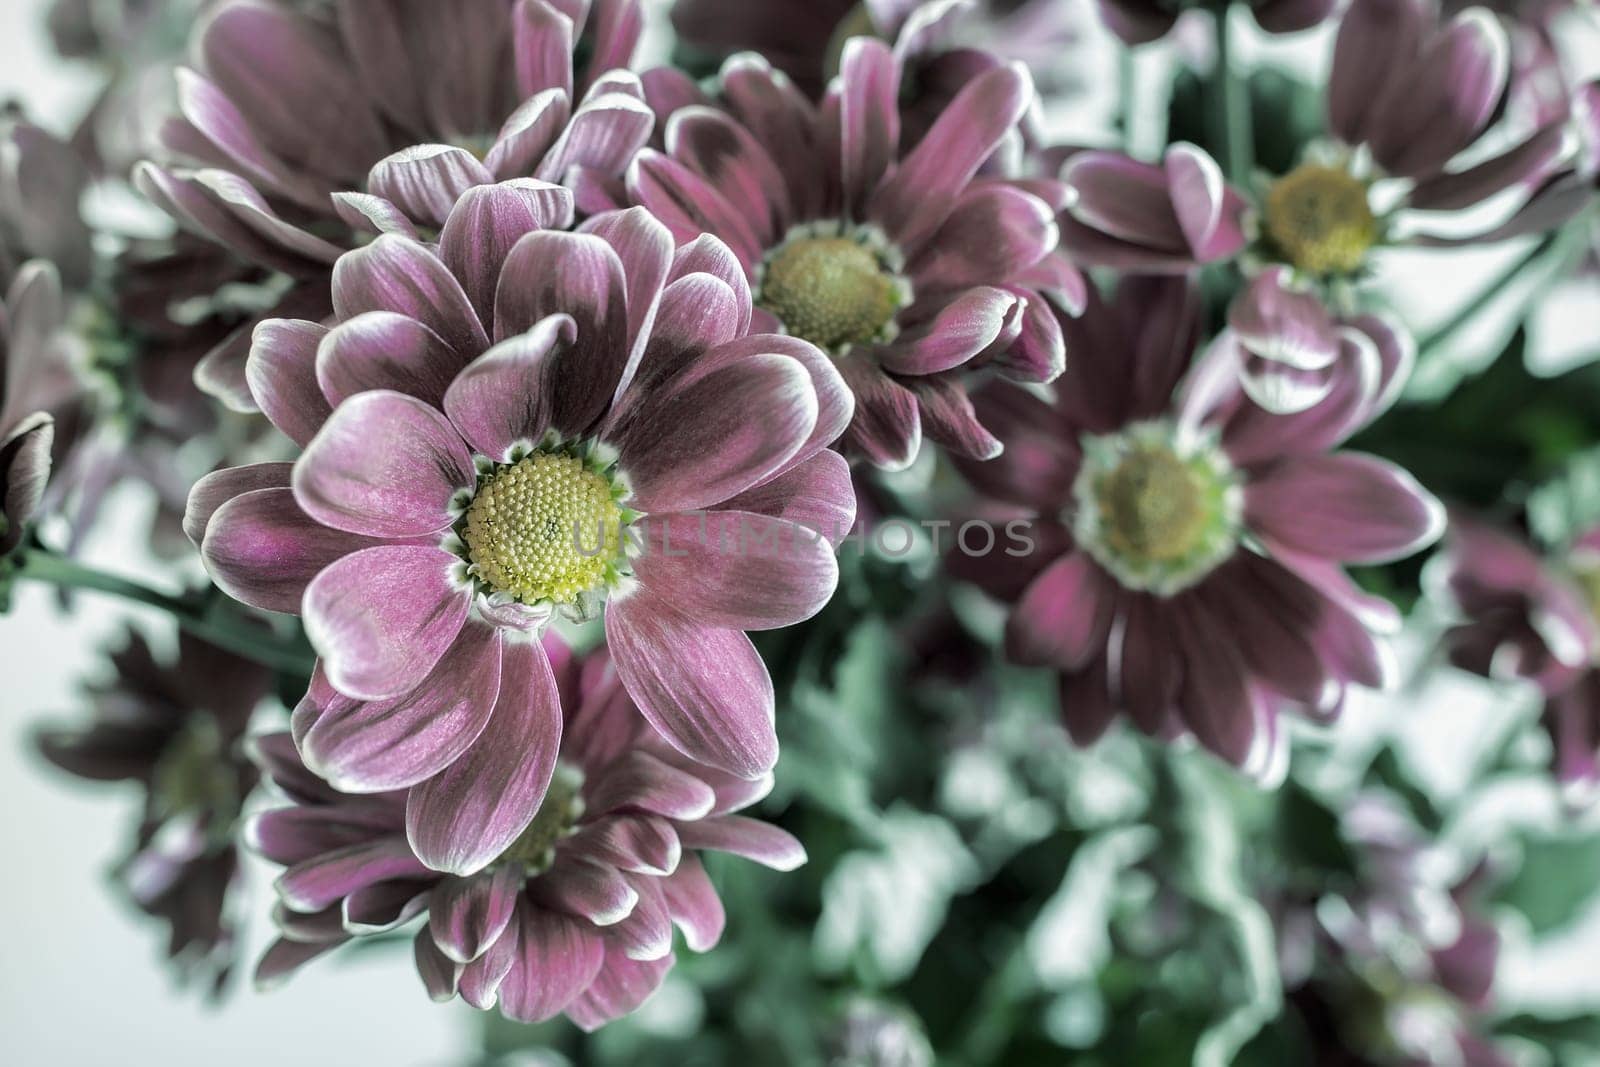 Beautiful white chrysanthemum in a bouquet among other flowers. Presented close-up.